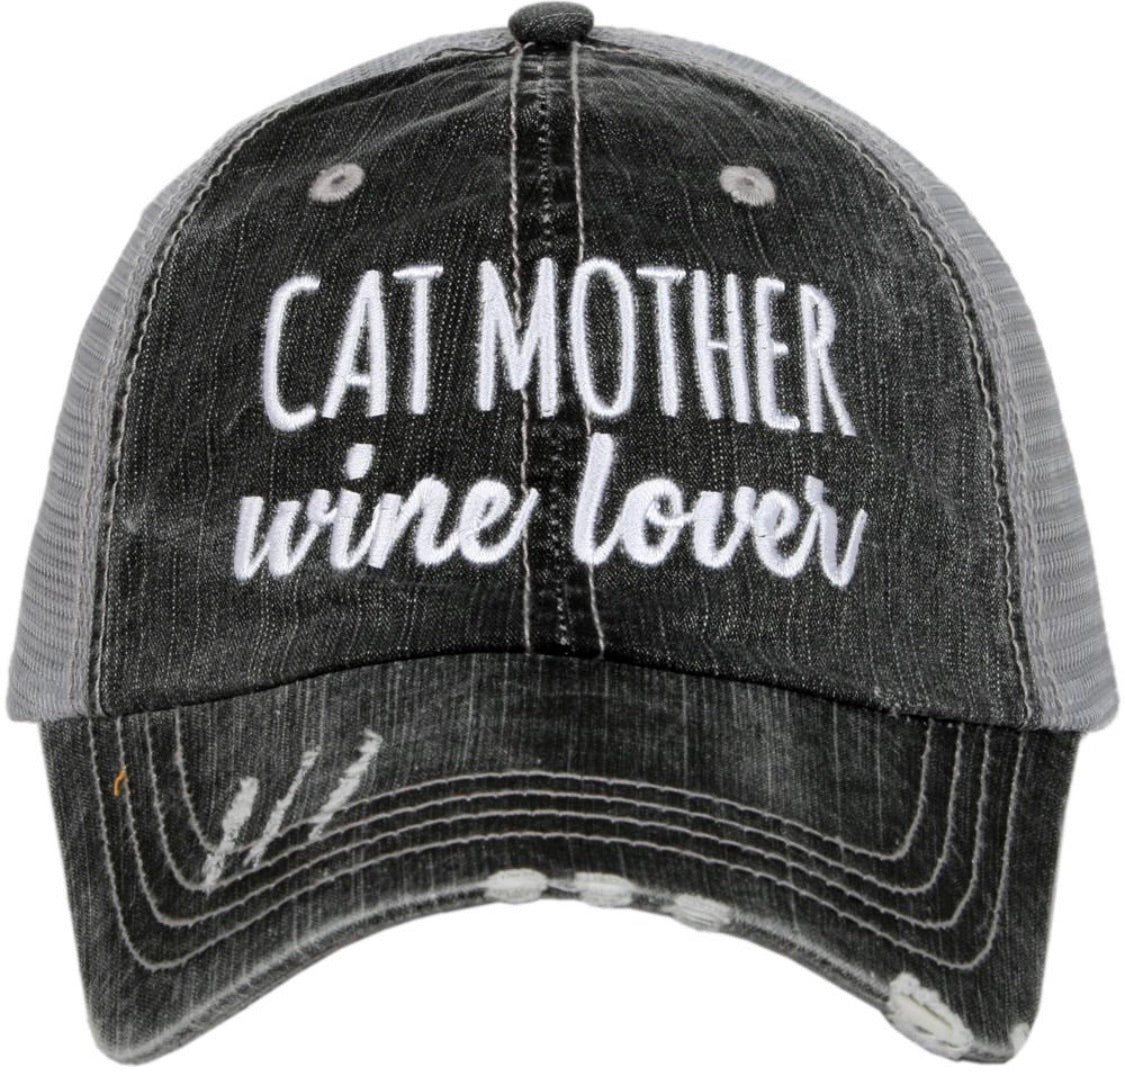 Hats and shirts { Hold my drink I gotta pet this dog } Customize by choosing hat options & clothing options. - Stacy's Pink Martini Boutique